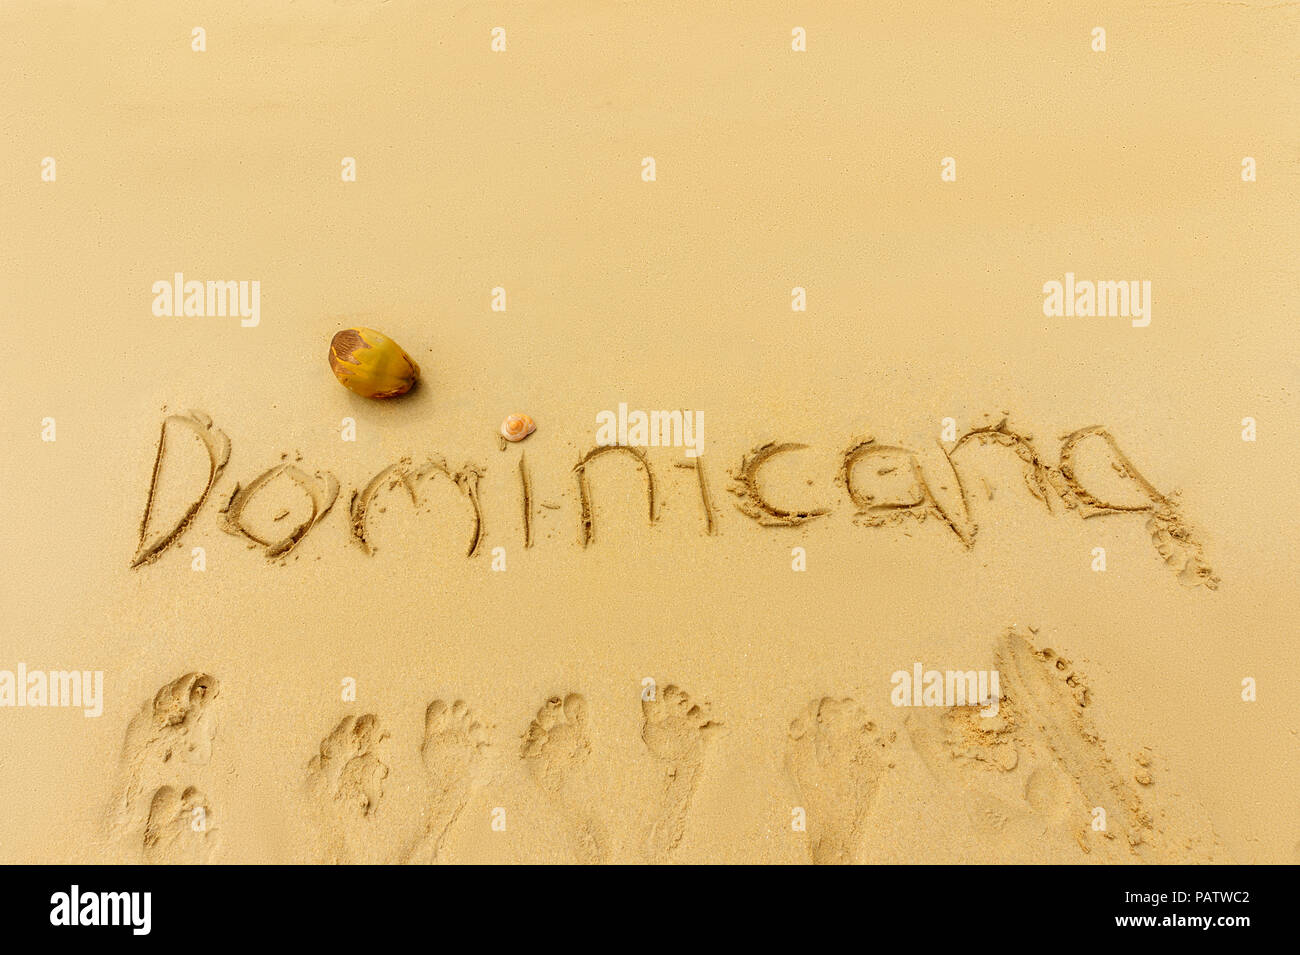 exotic vacation concept. Dominican republic written on the sand and footprints on the sand Stock Photo